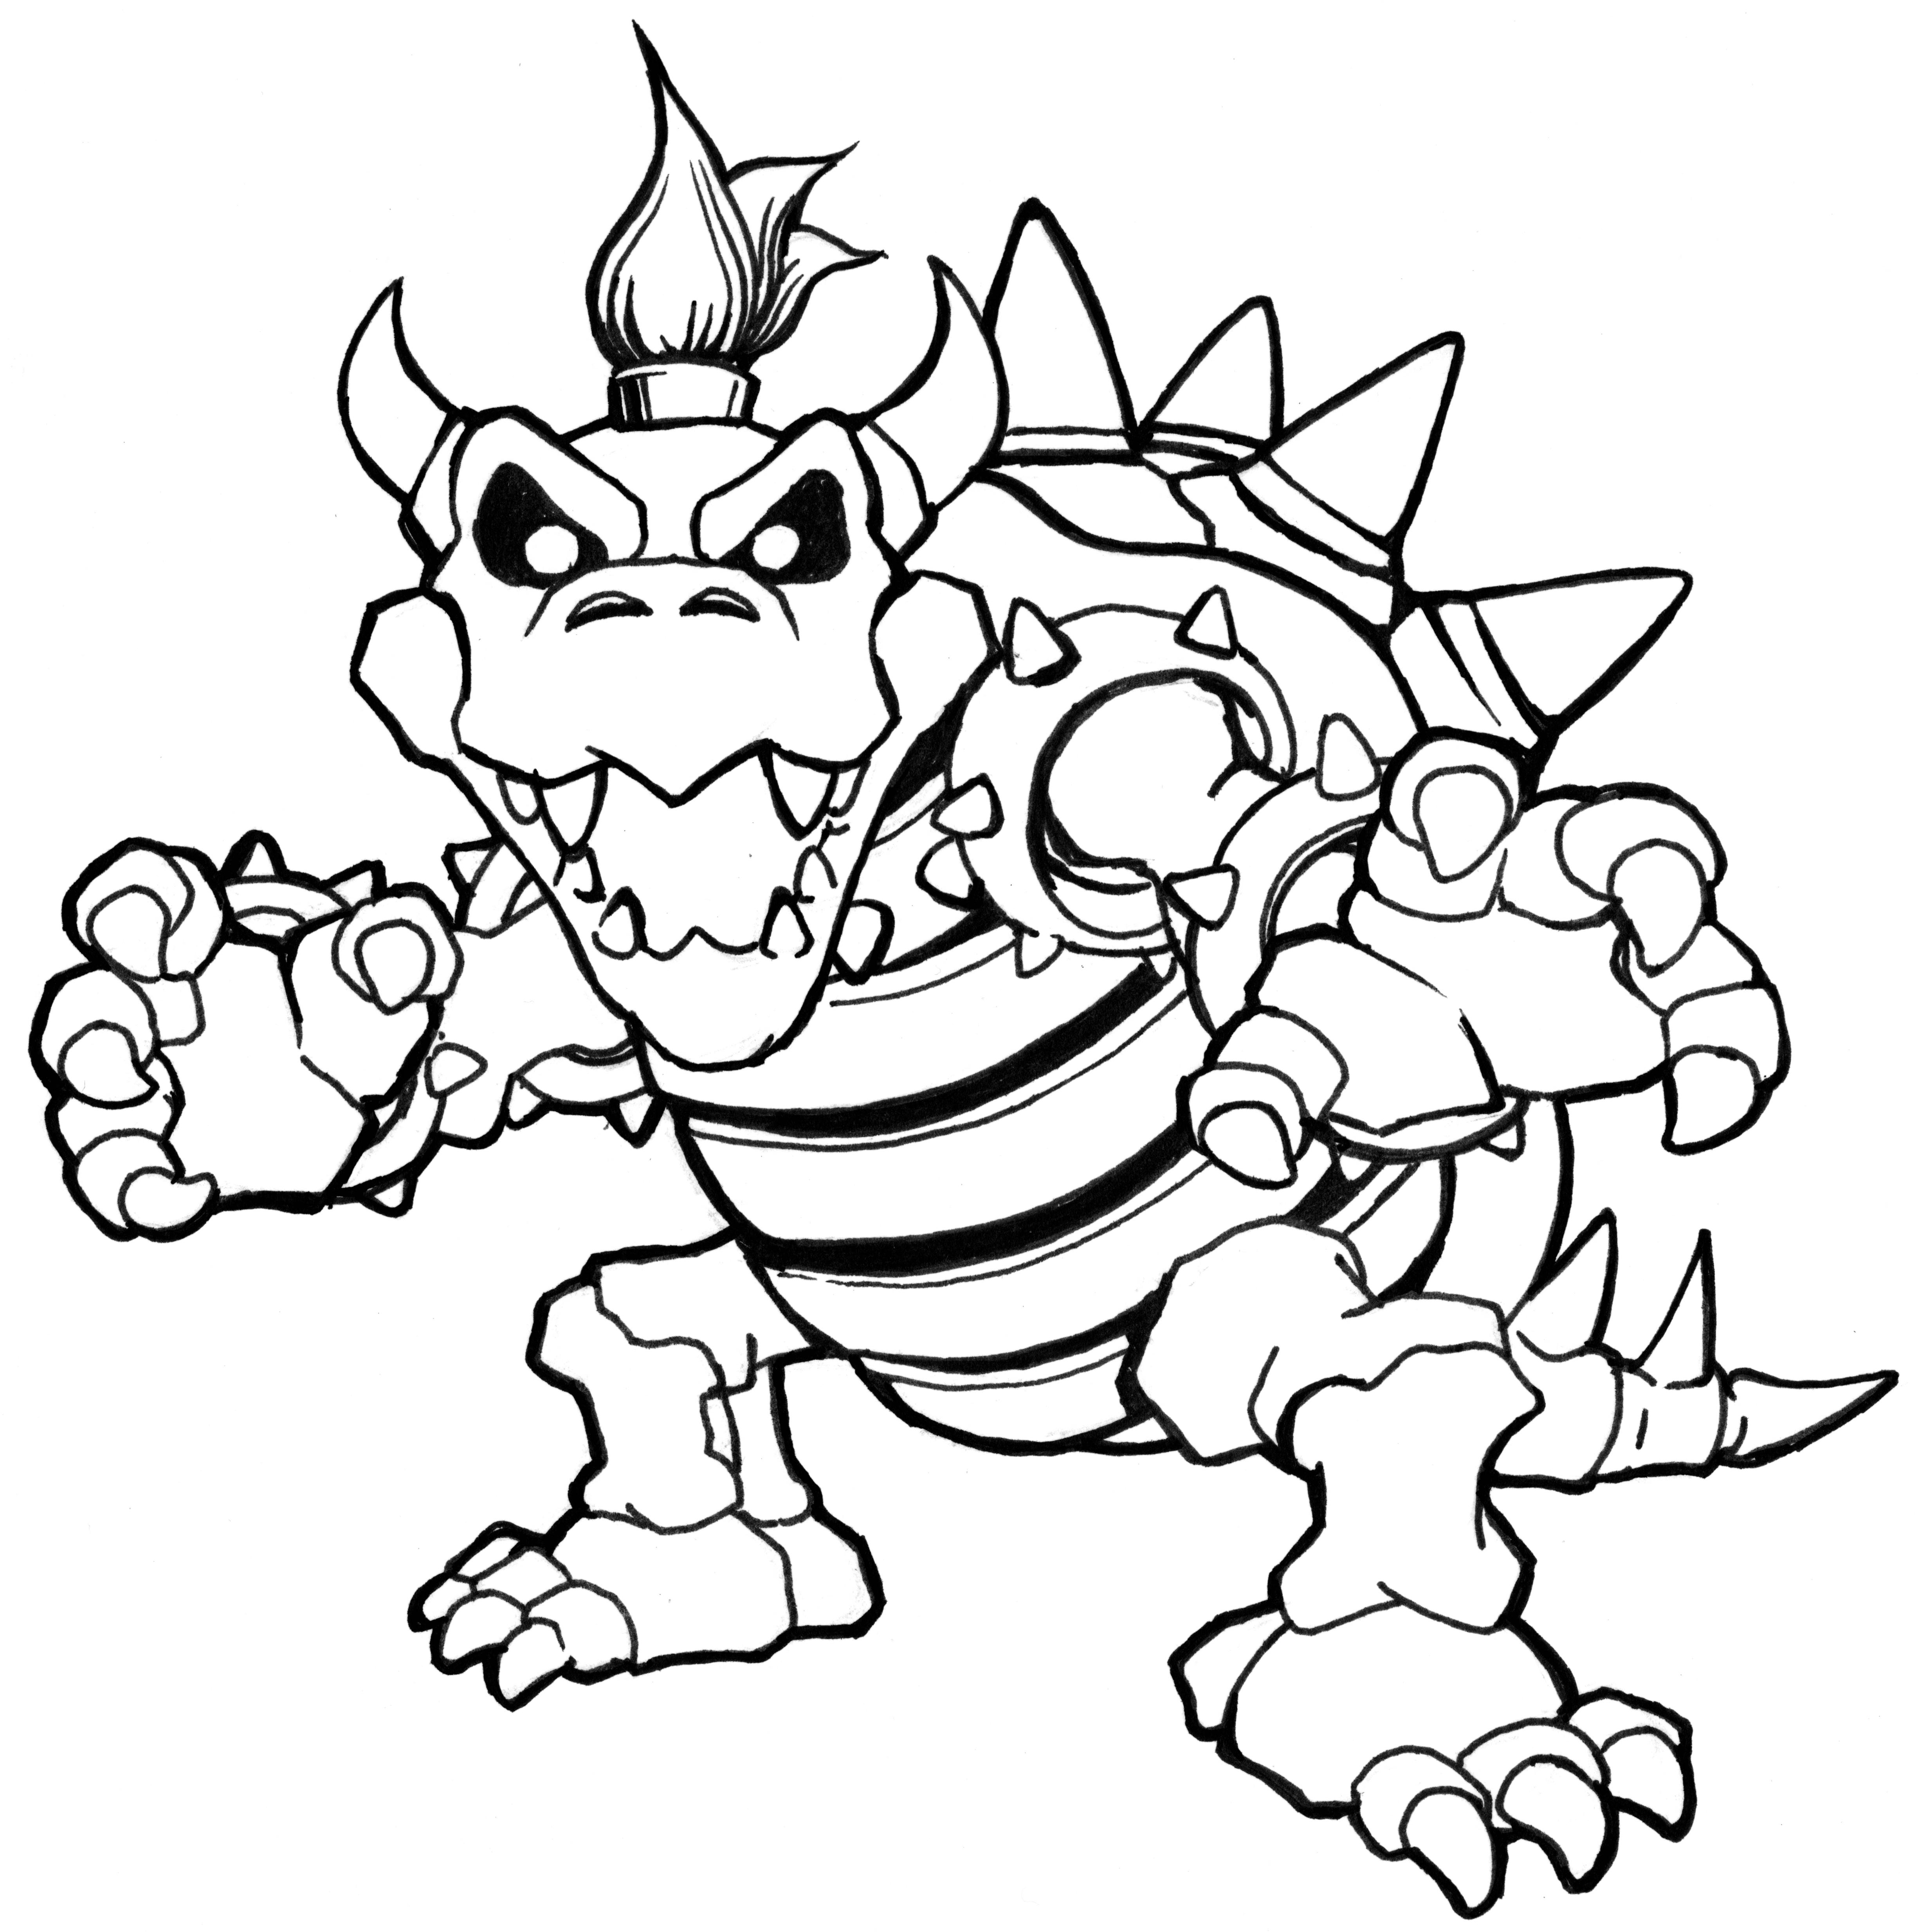 super mario odyssey coloring pages - Clip Art Library